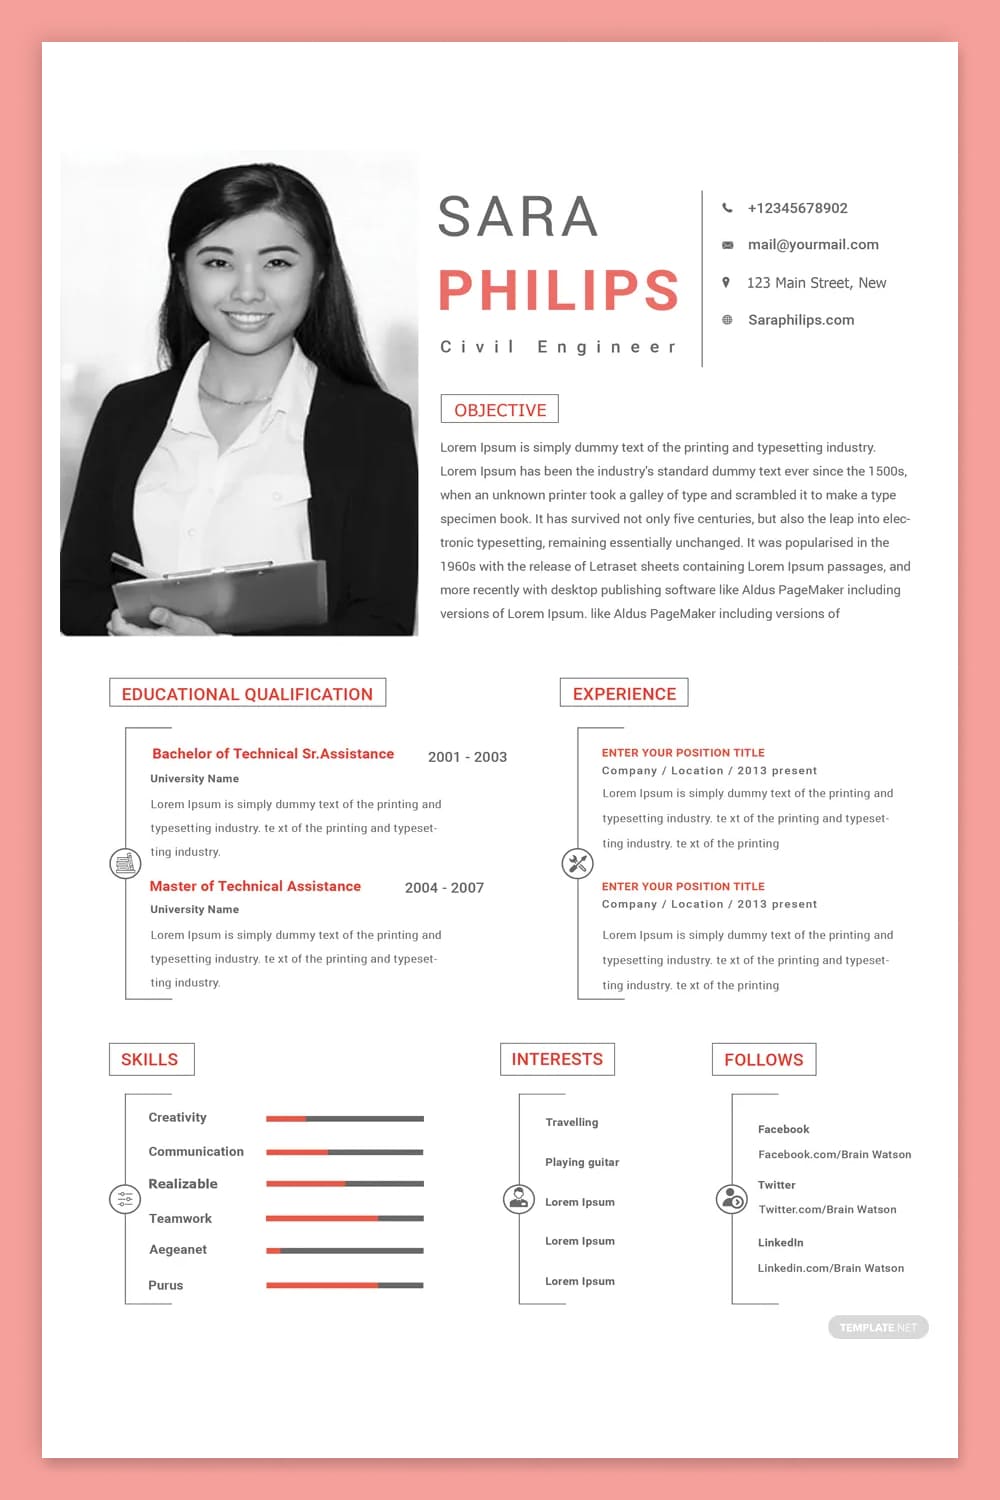 Resume with large photo and red and pink text.